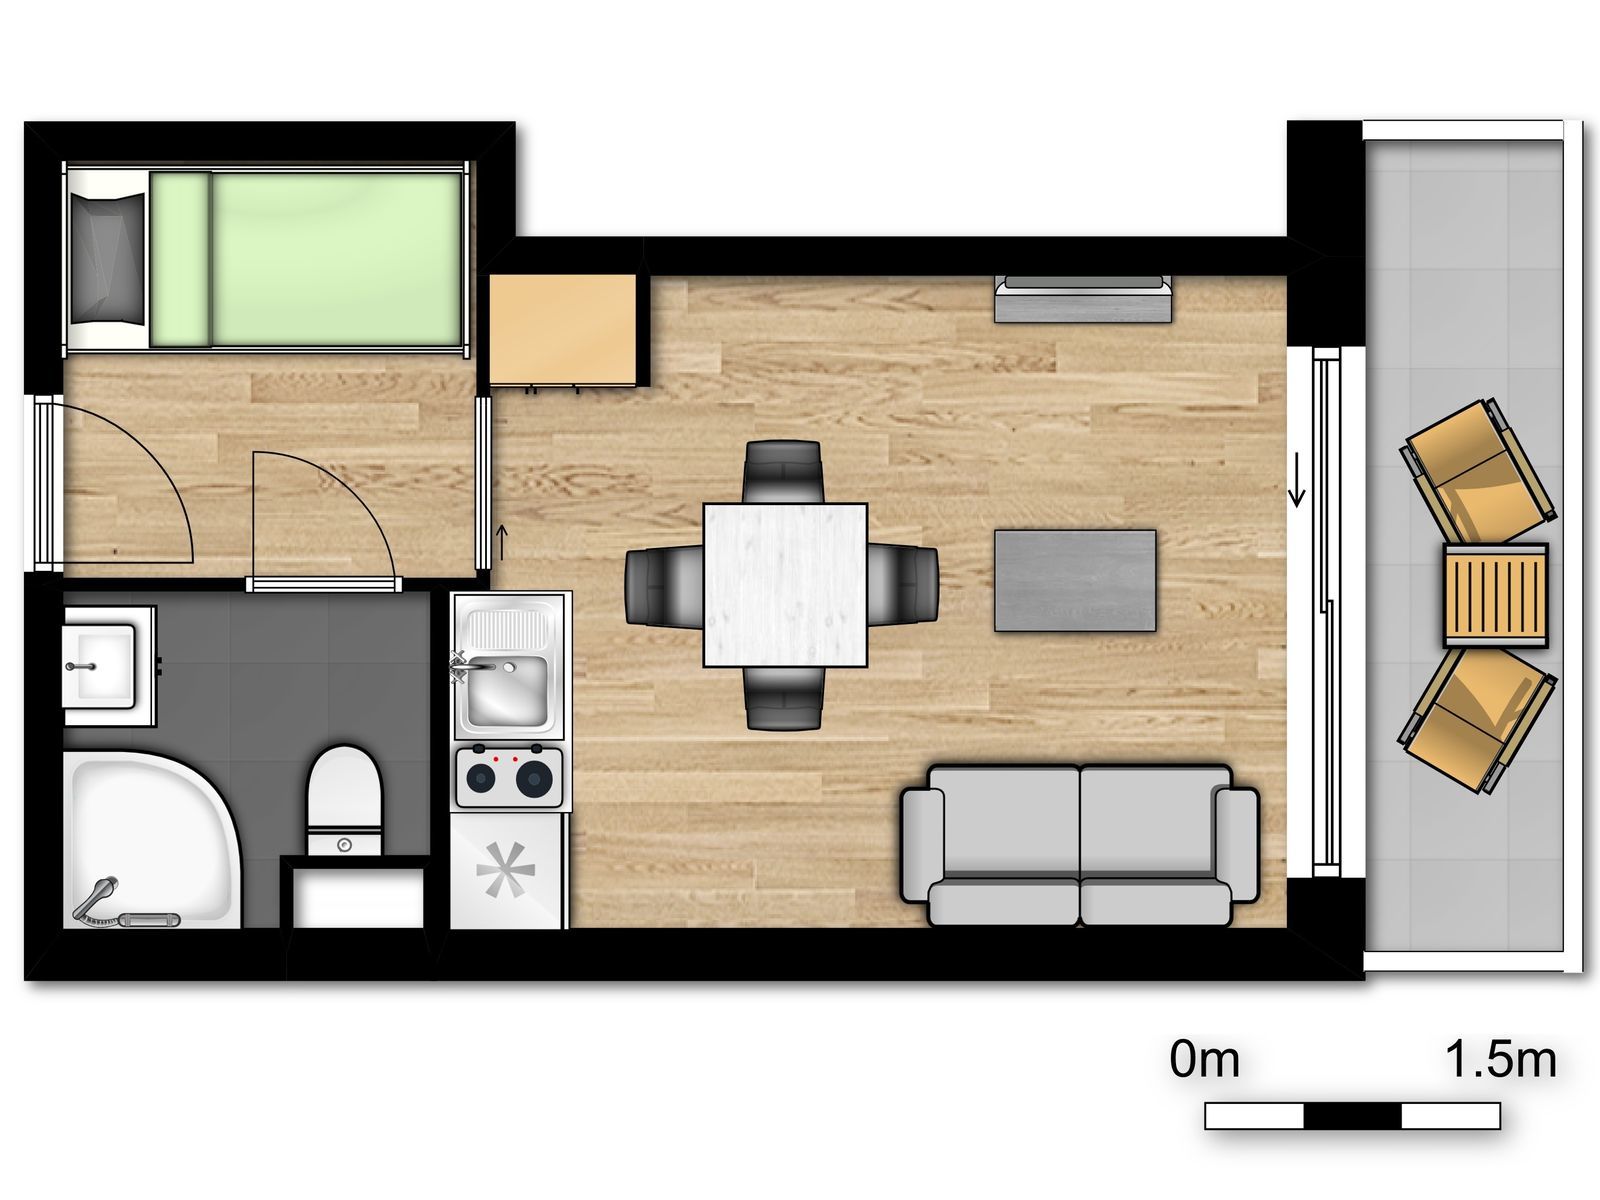 Standard studio for 4 people with sofa bed and balcony